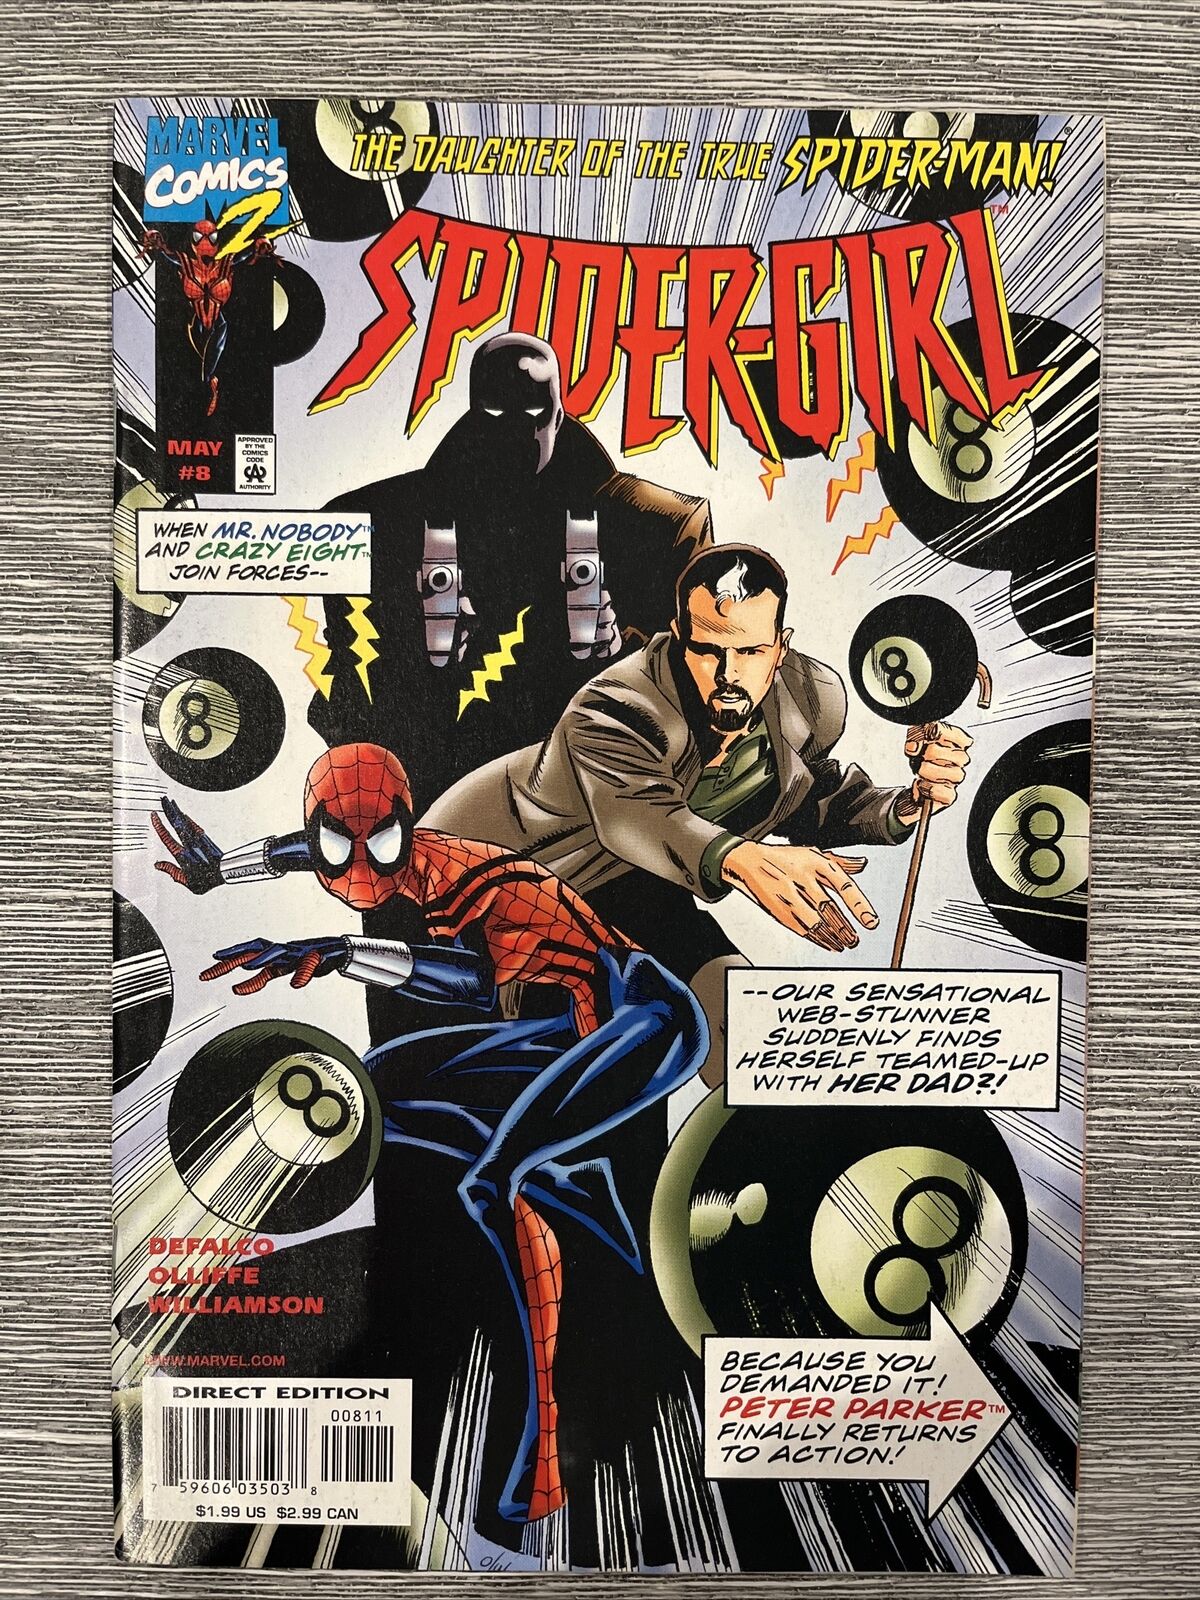 Spider-girl #8 Marvel Comics NM 1998 Amazing 1999. In New Bag & Boarder. See Pic